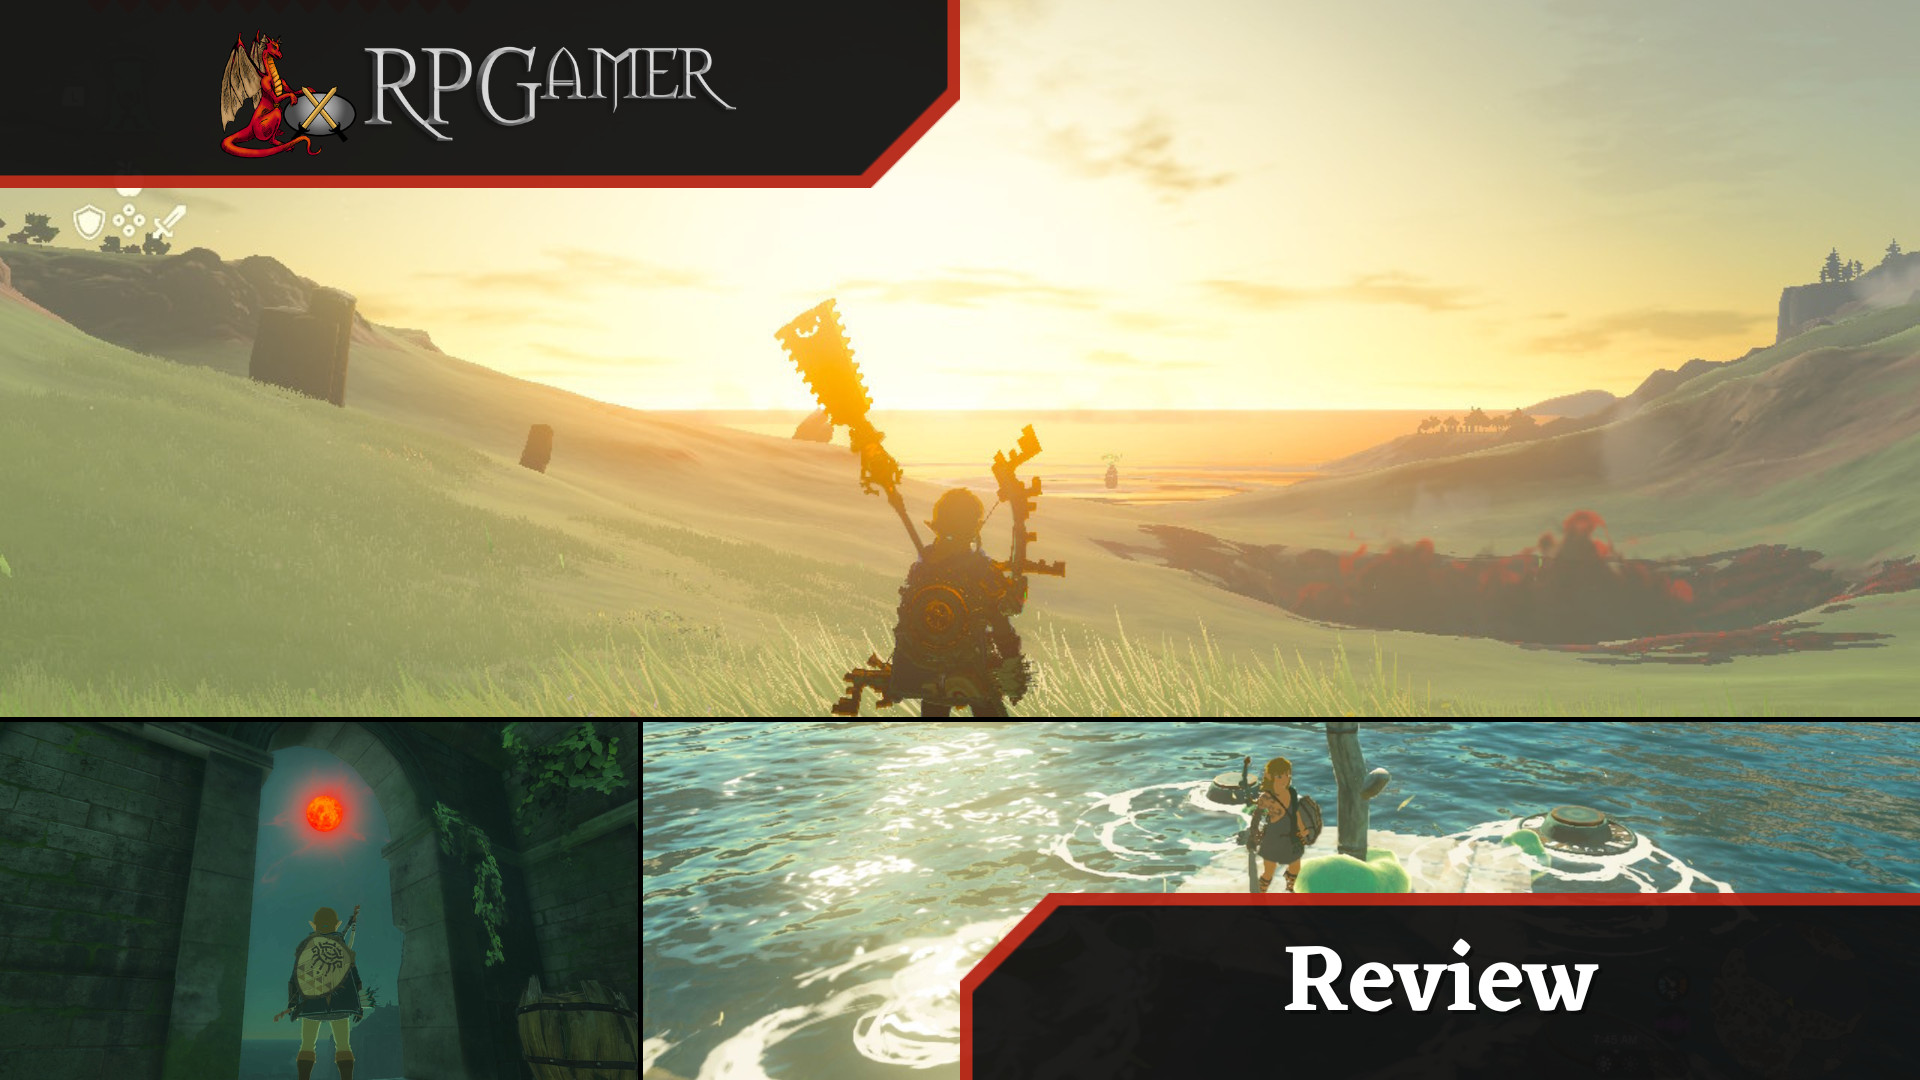 GAME REVIEW: The Legend of Zelda: Tears of the Kingdom – the rightful  sequel, or just an expensive DLC? - Gedling Eye